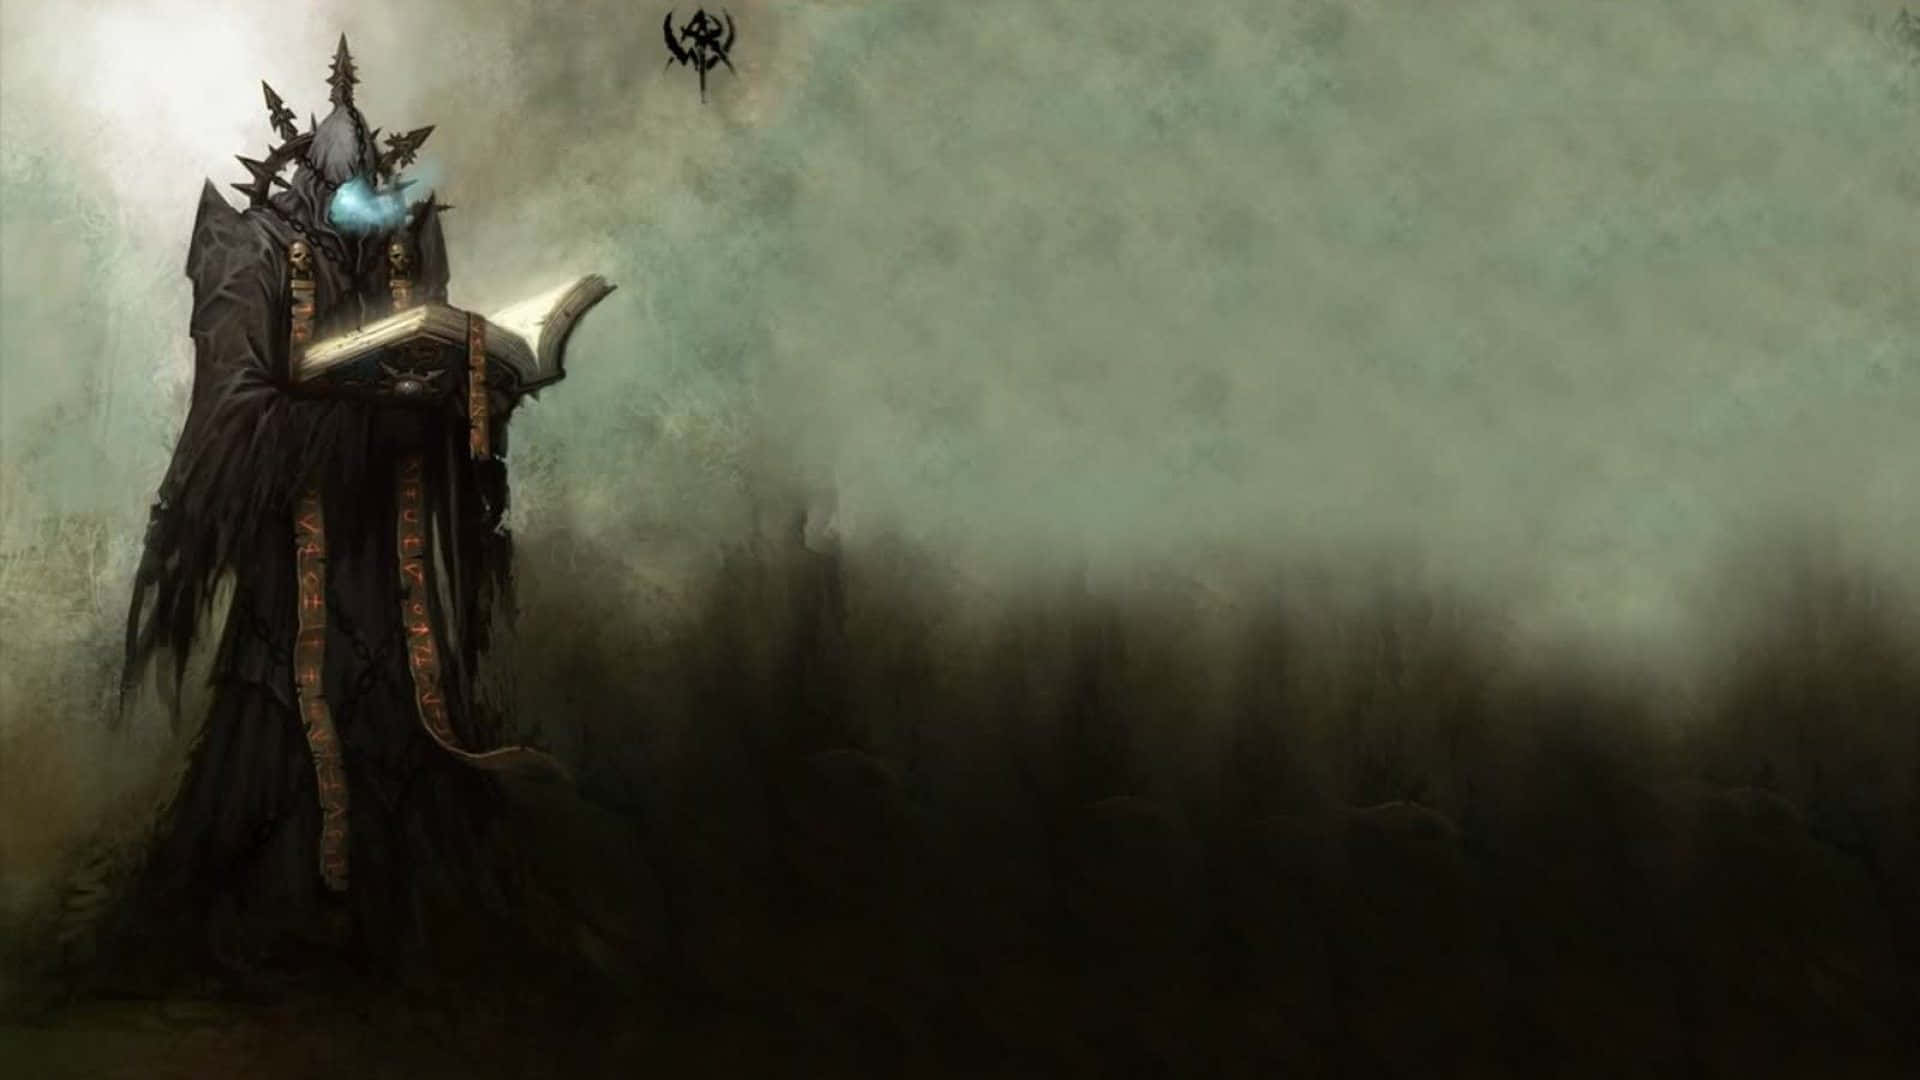 A Wizard casts a powerful spell in a mystical forest Wallpaper